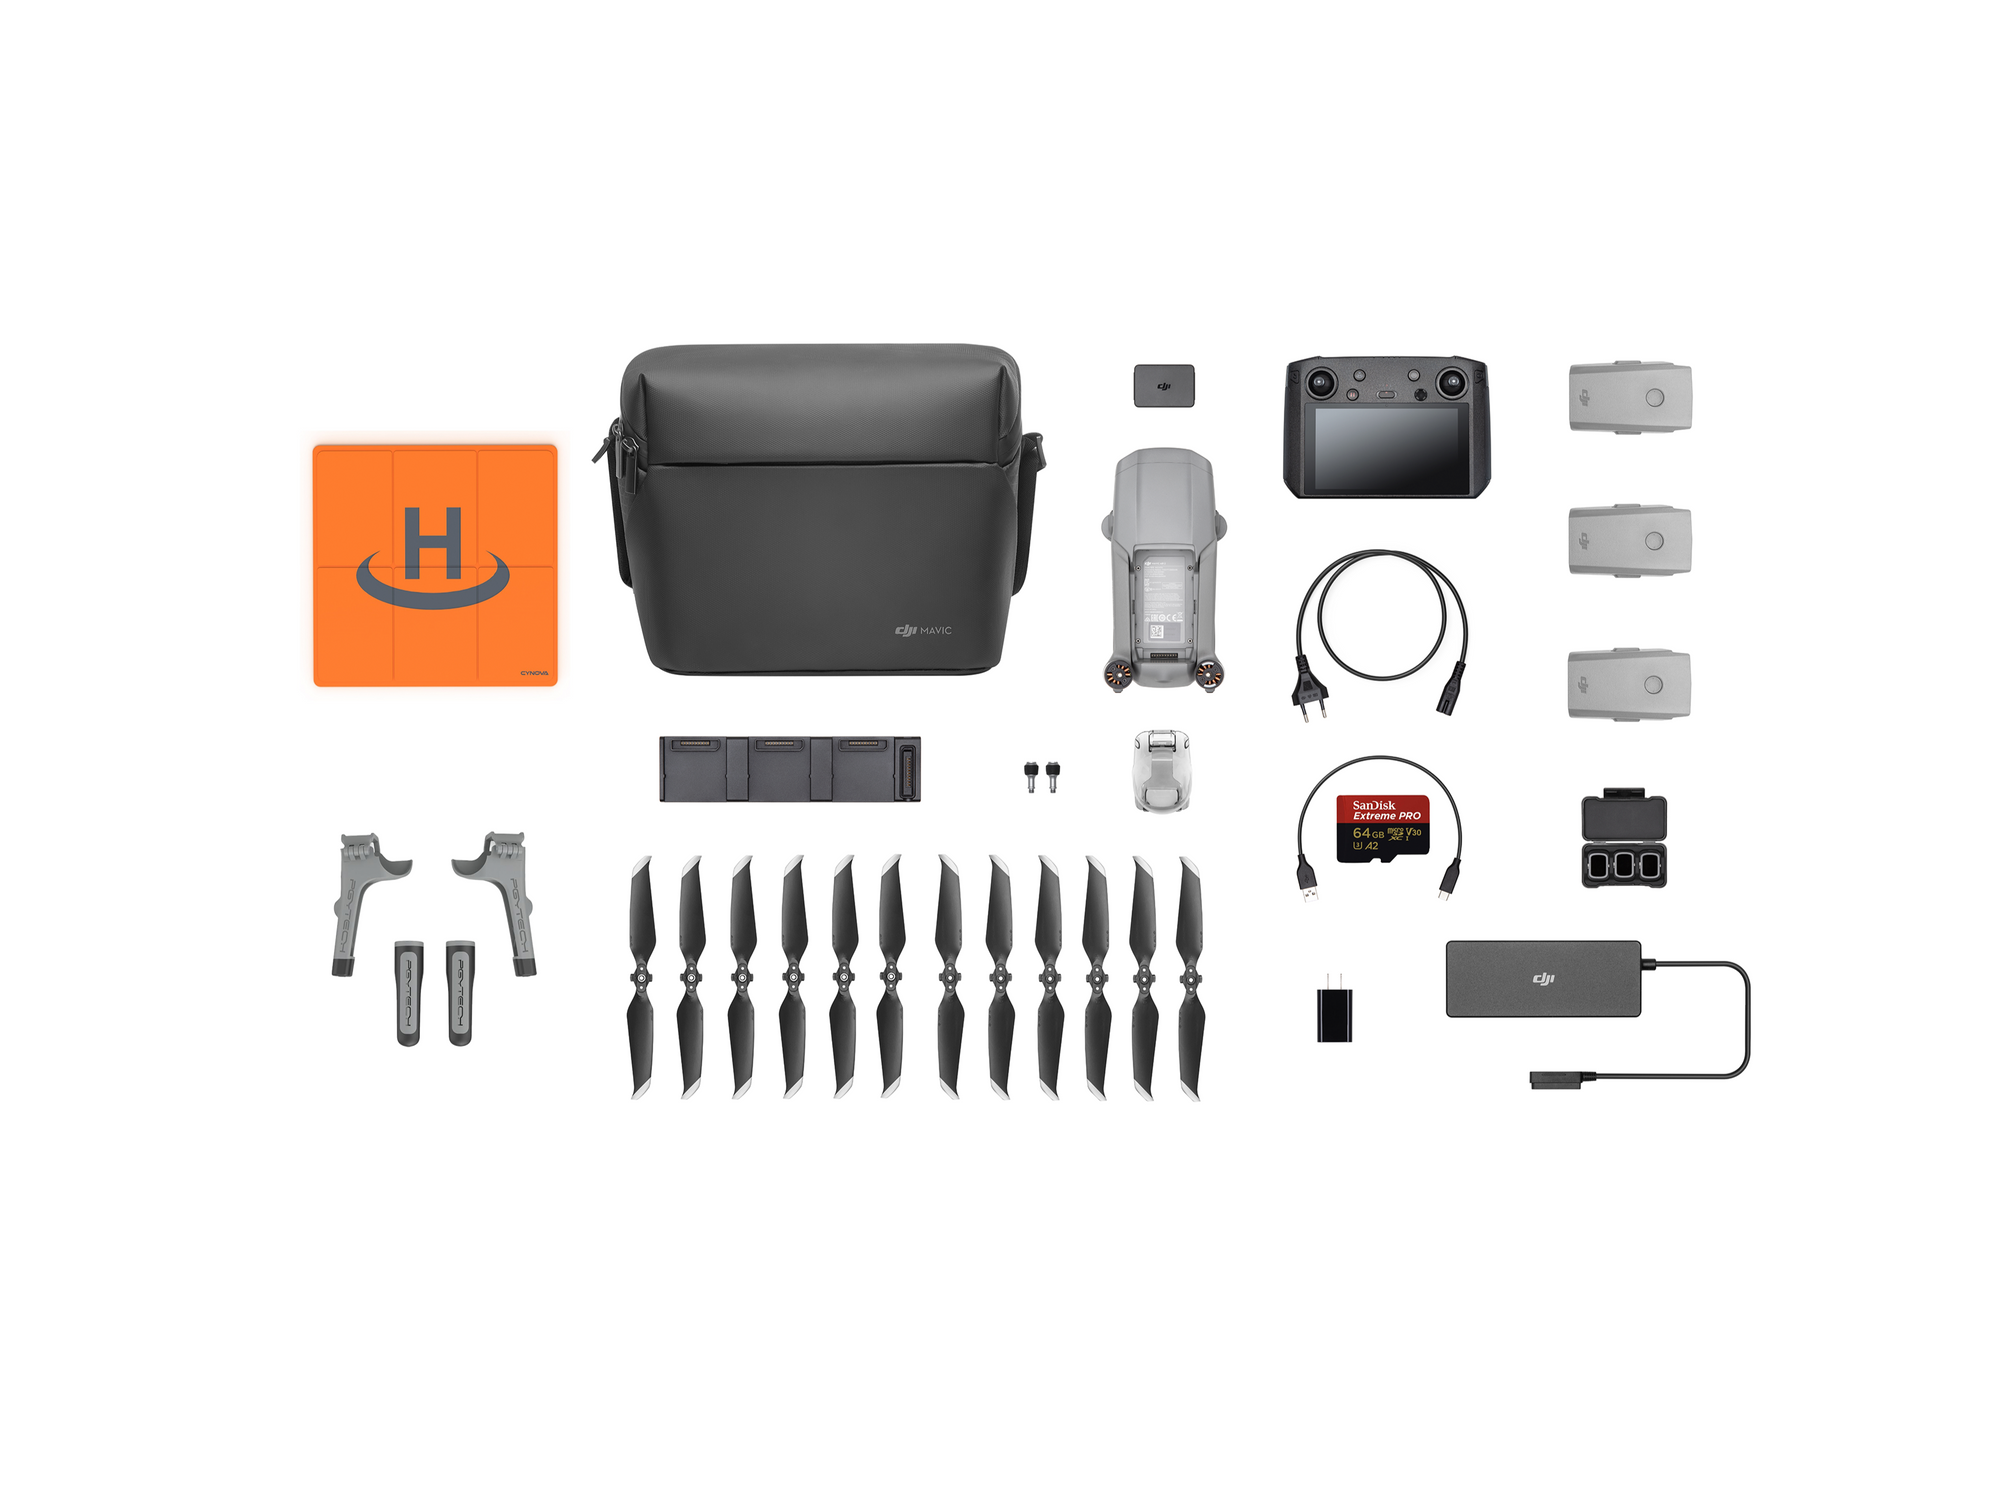 Mavic Air 2 with DJI Smart Controller Everything You Need Kit